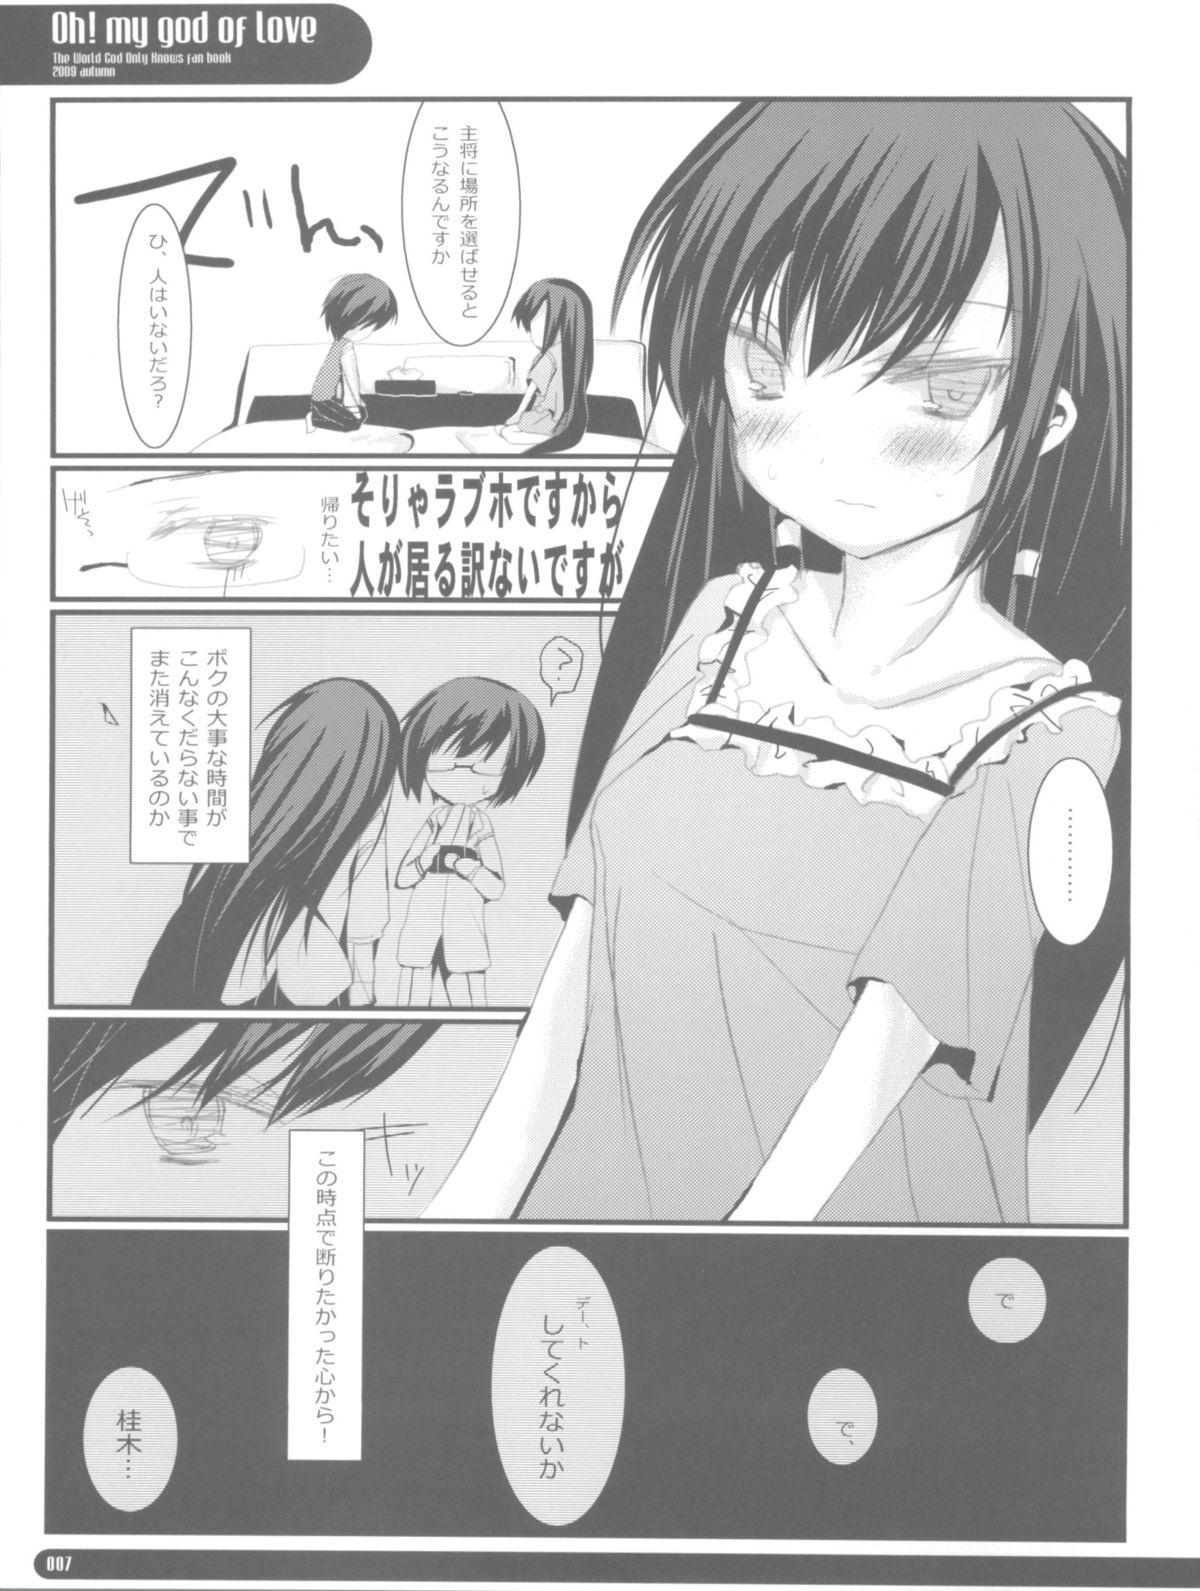 Cocksucking OH!MY GOD OF LOVE - The world god only knows Girl Girl - Page 7